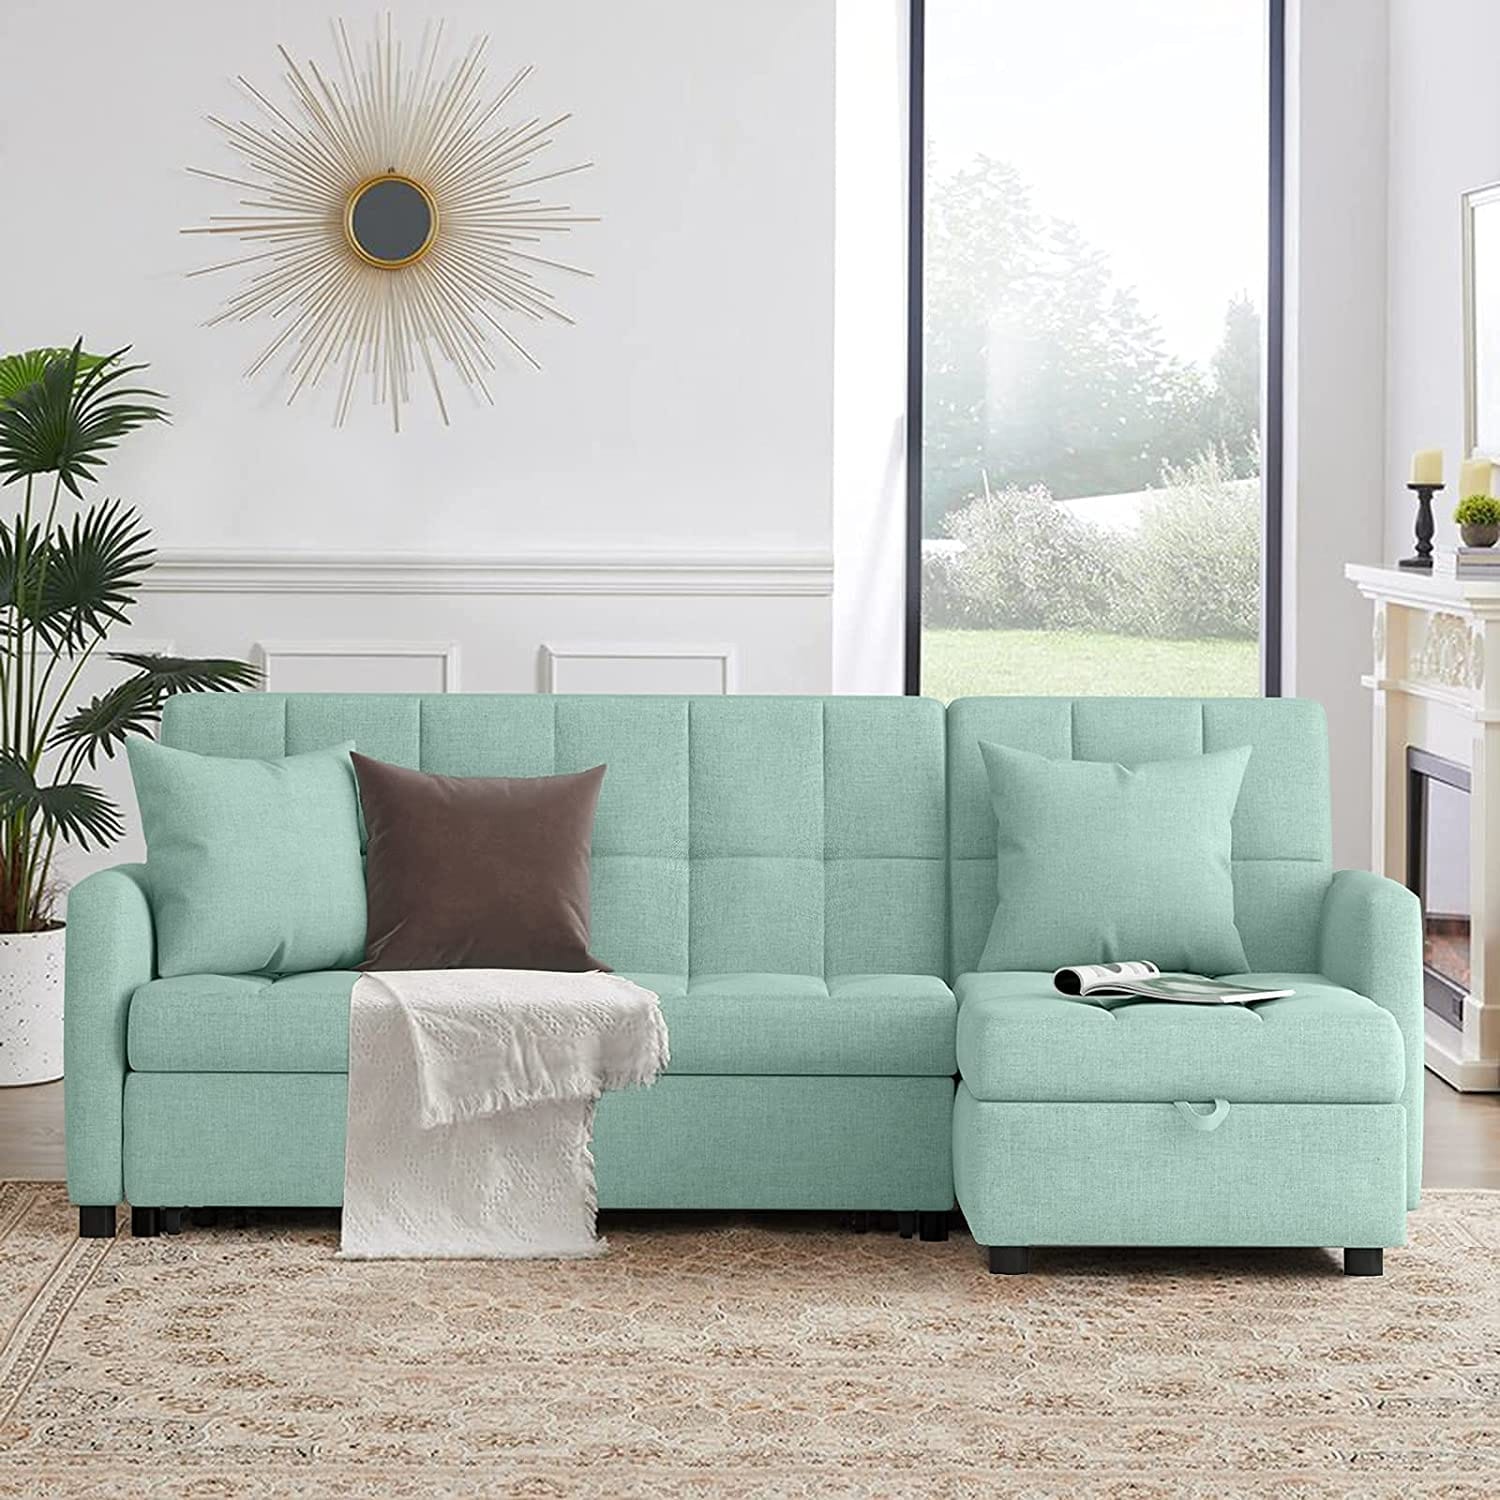 Our Bestseller sectional with sleeper and storage Lagozzo L